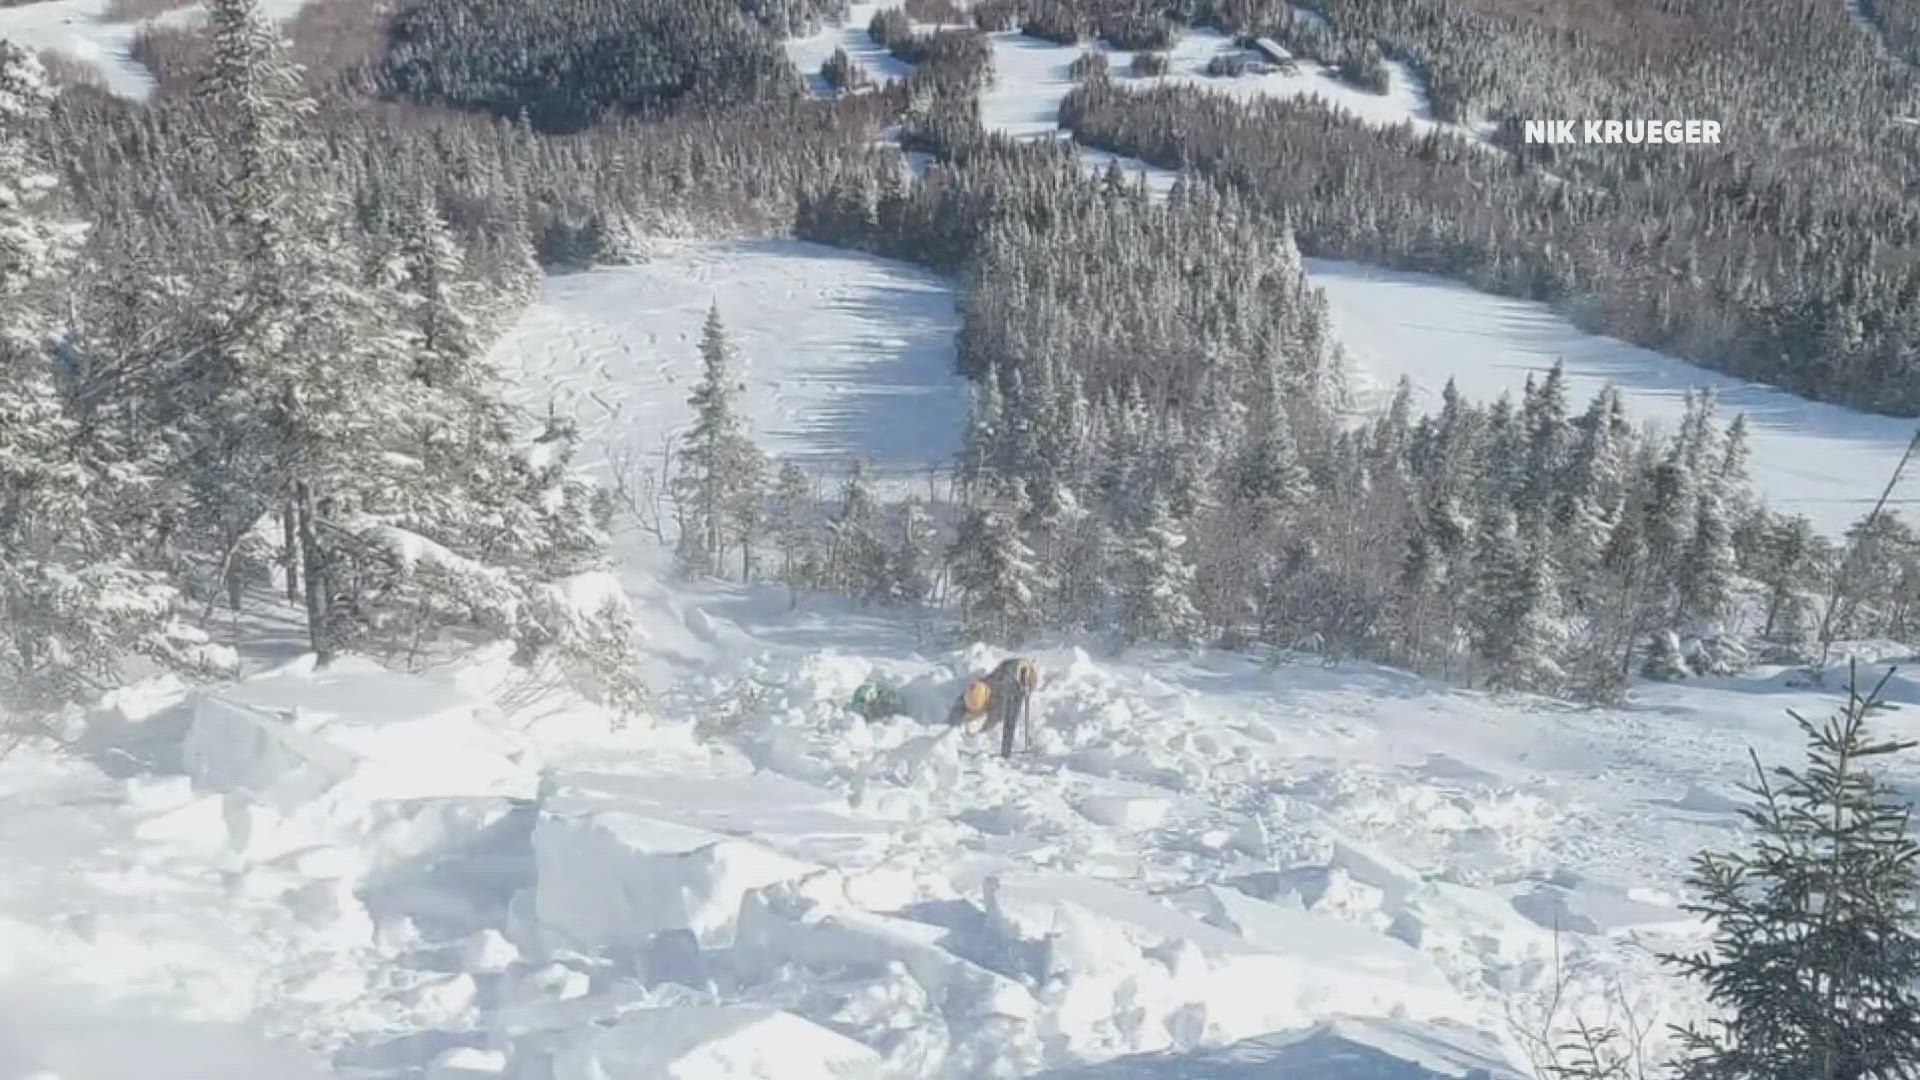 According to other skiers, the avalanche dragged the man about 30 feet down the mountain on a 50-foot slide.